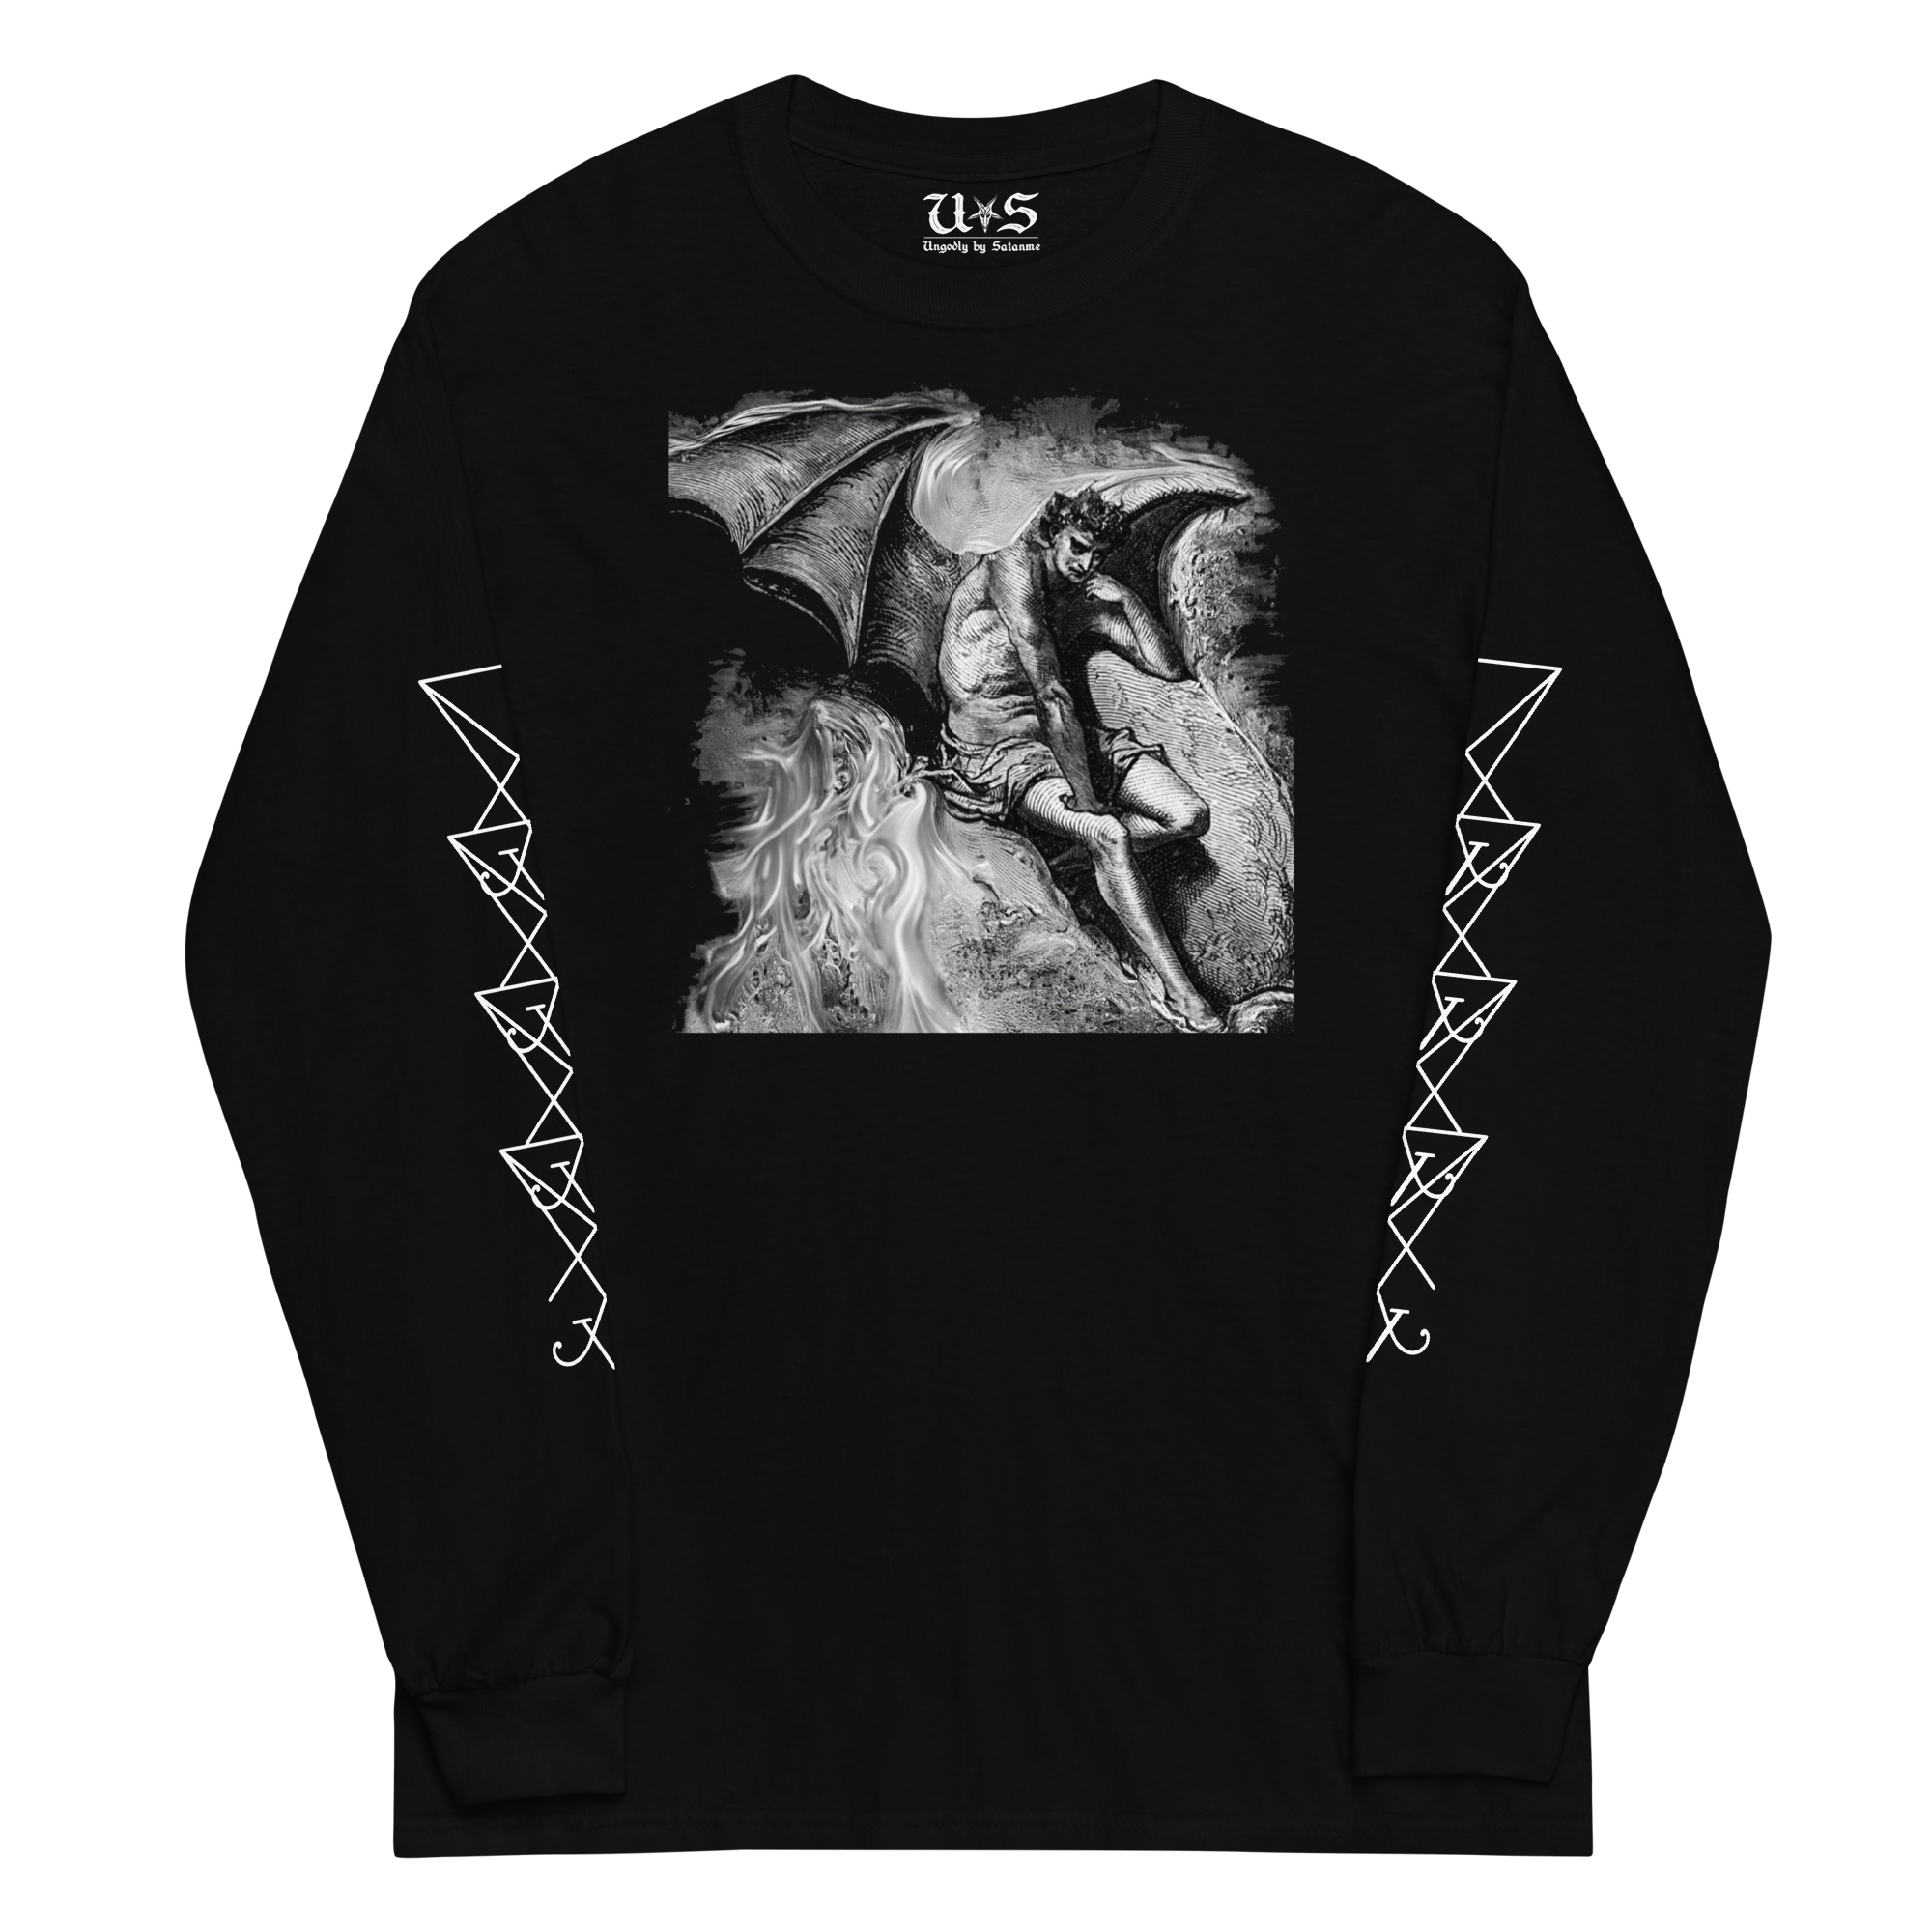 Lucifer's Reflection Graphic Long-Sleeve Shirt